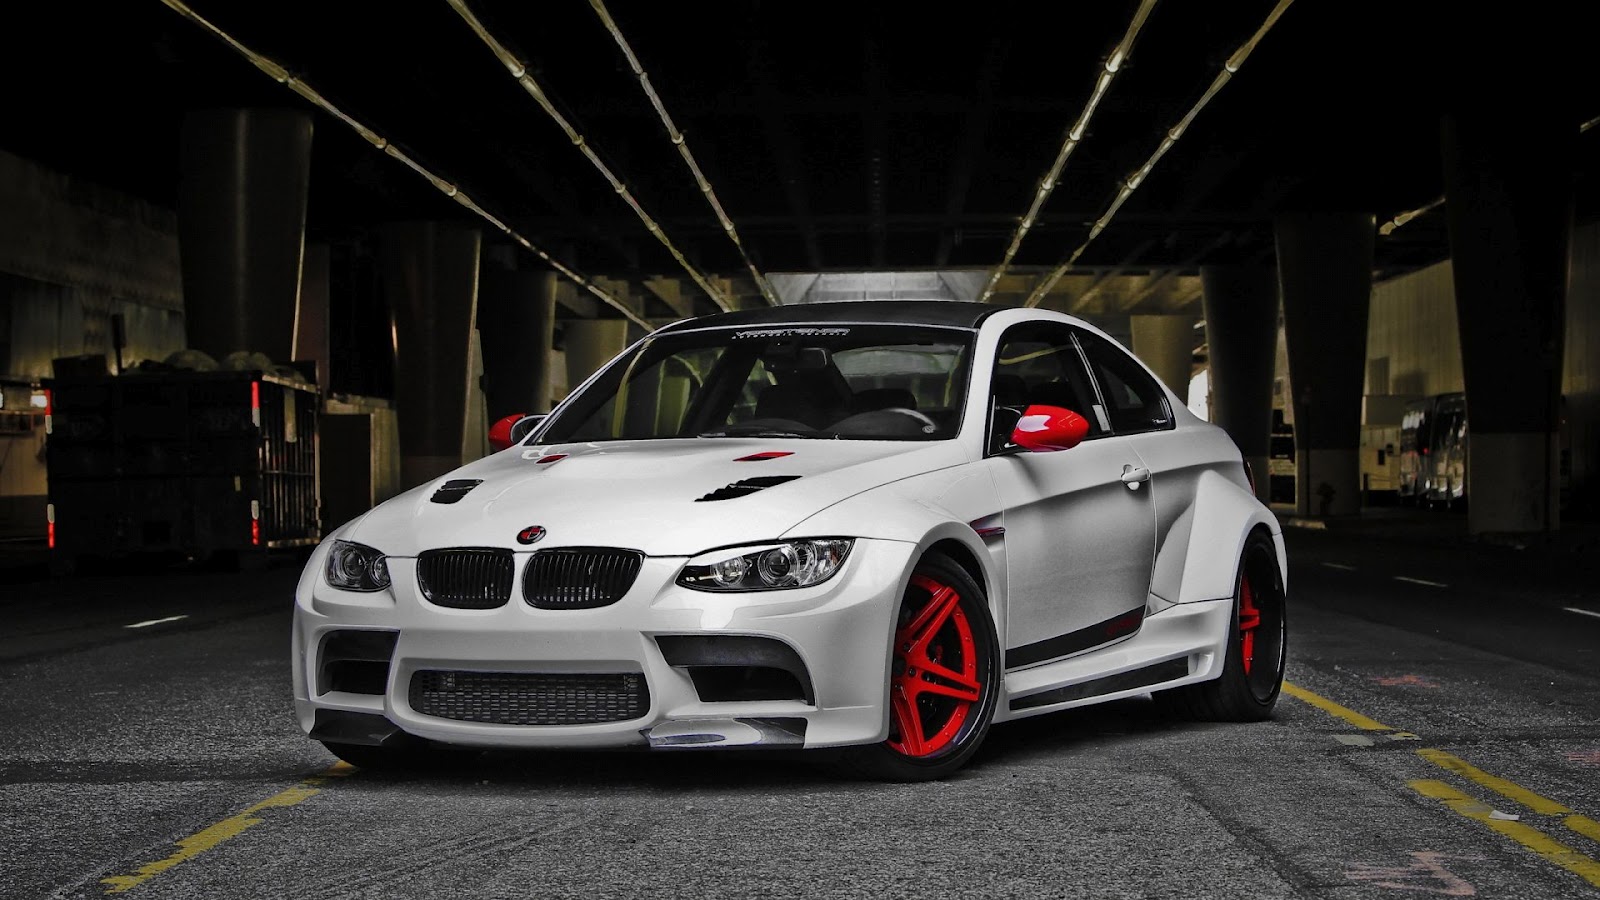 Free Hd Wallpapers Bmw M3 Wallpapers HD